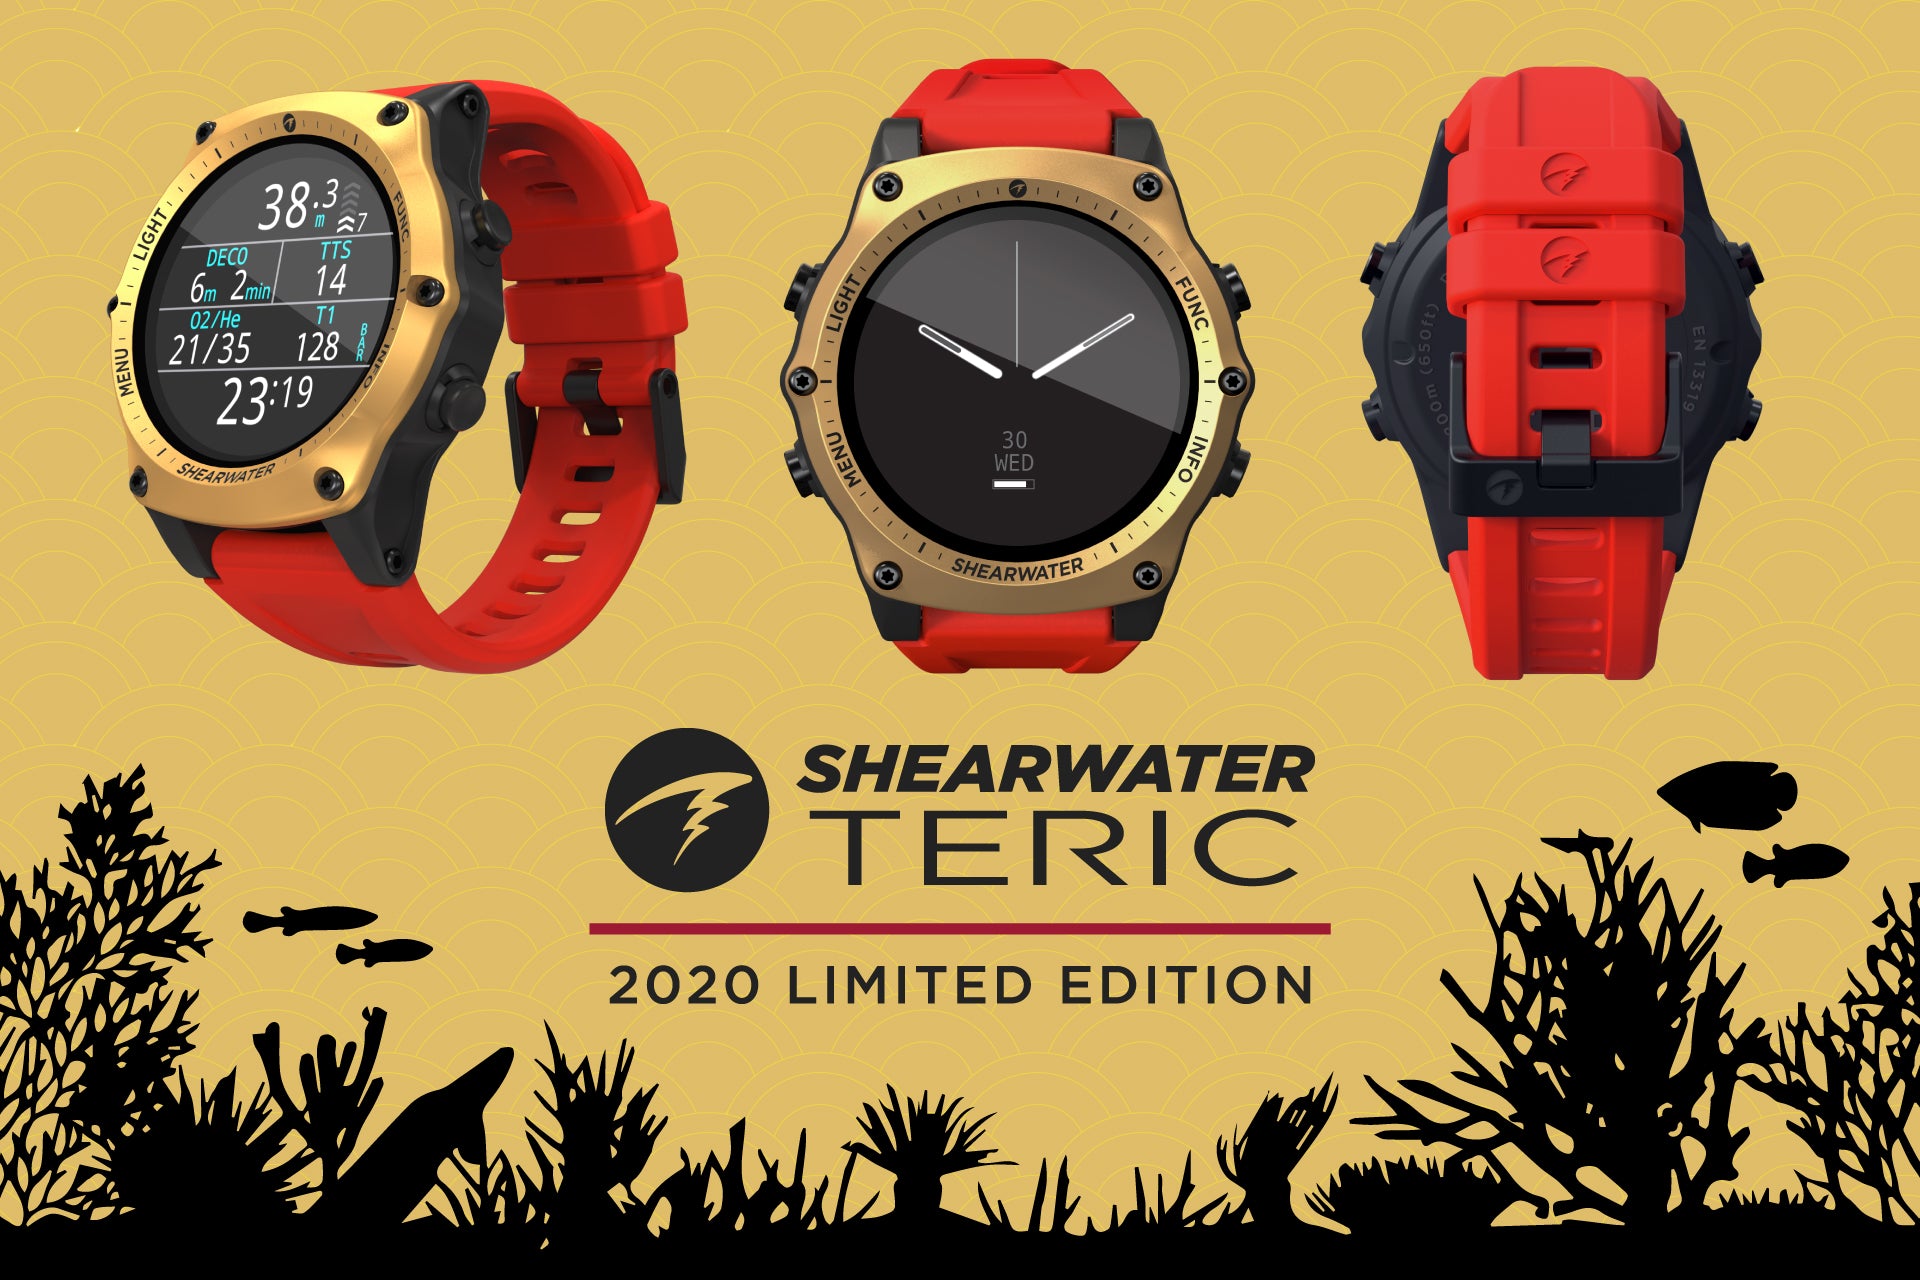 Introducing the 2020 Limited Edition Shearwater Teric